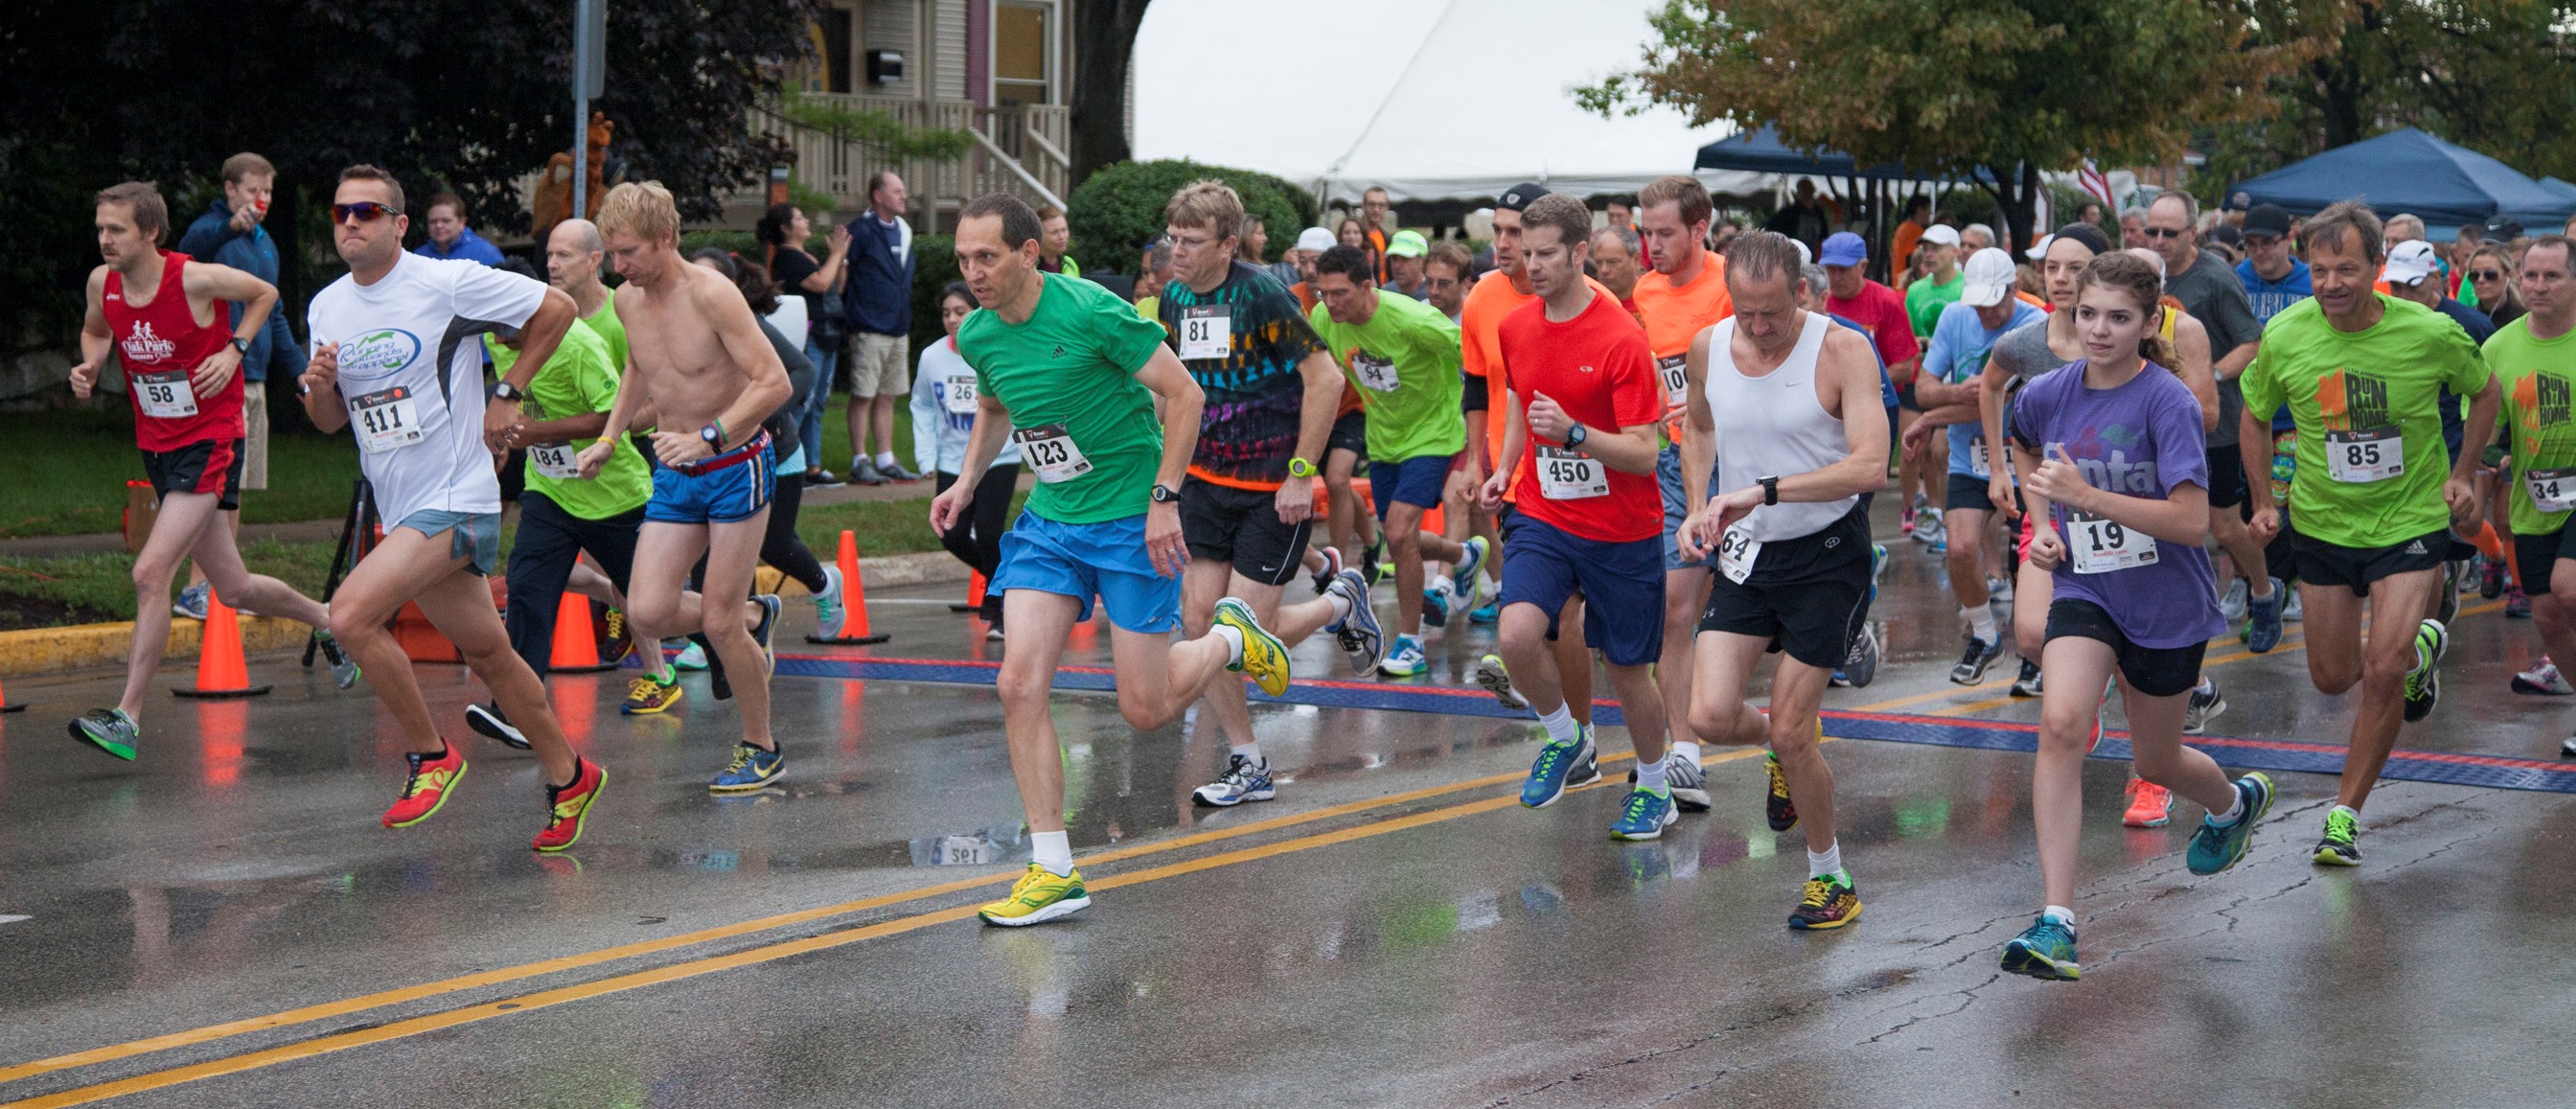 Last year’s Run 4 Home featured nearly 1,000 attendees!